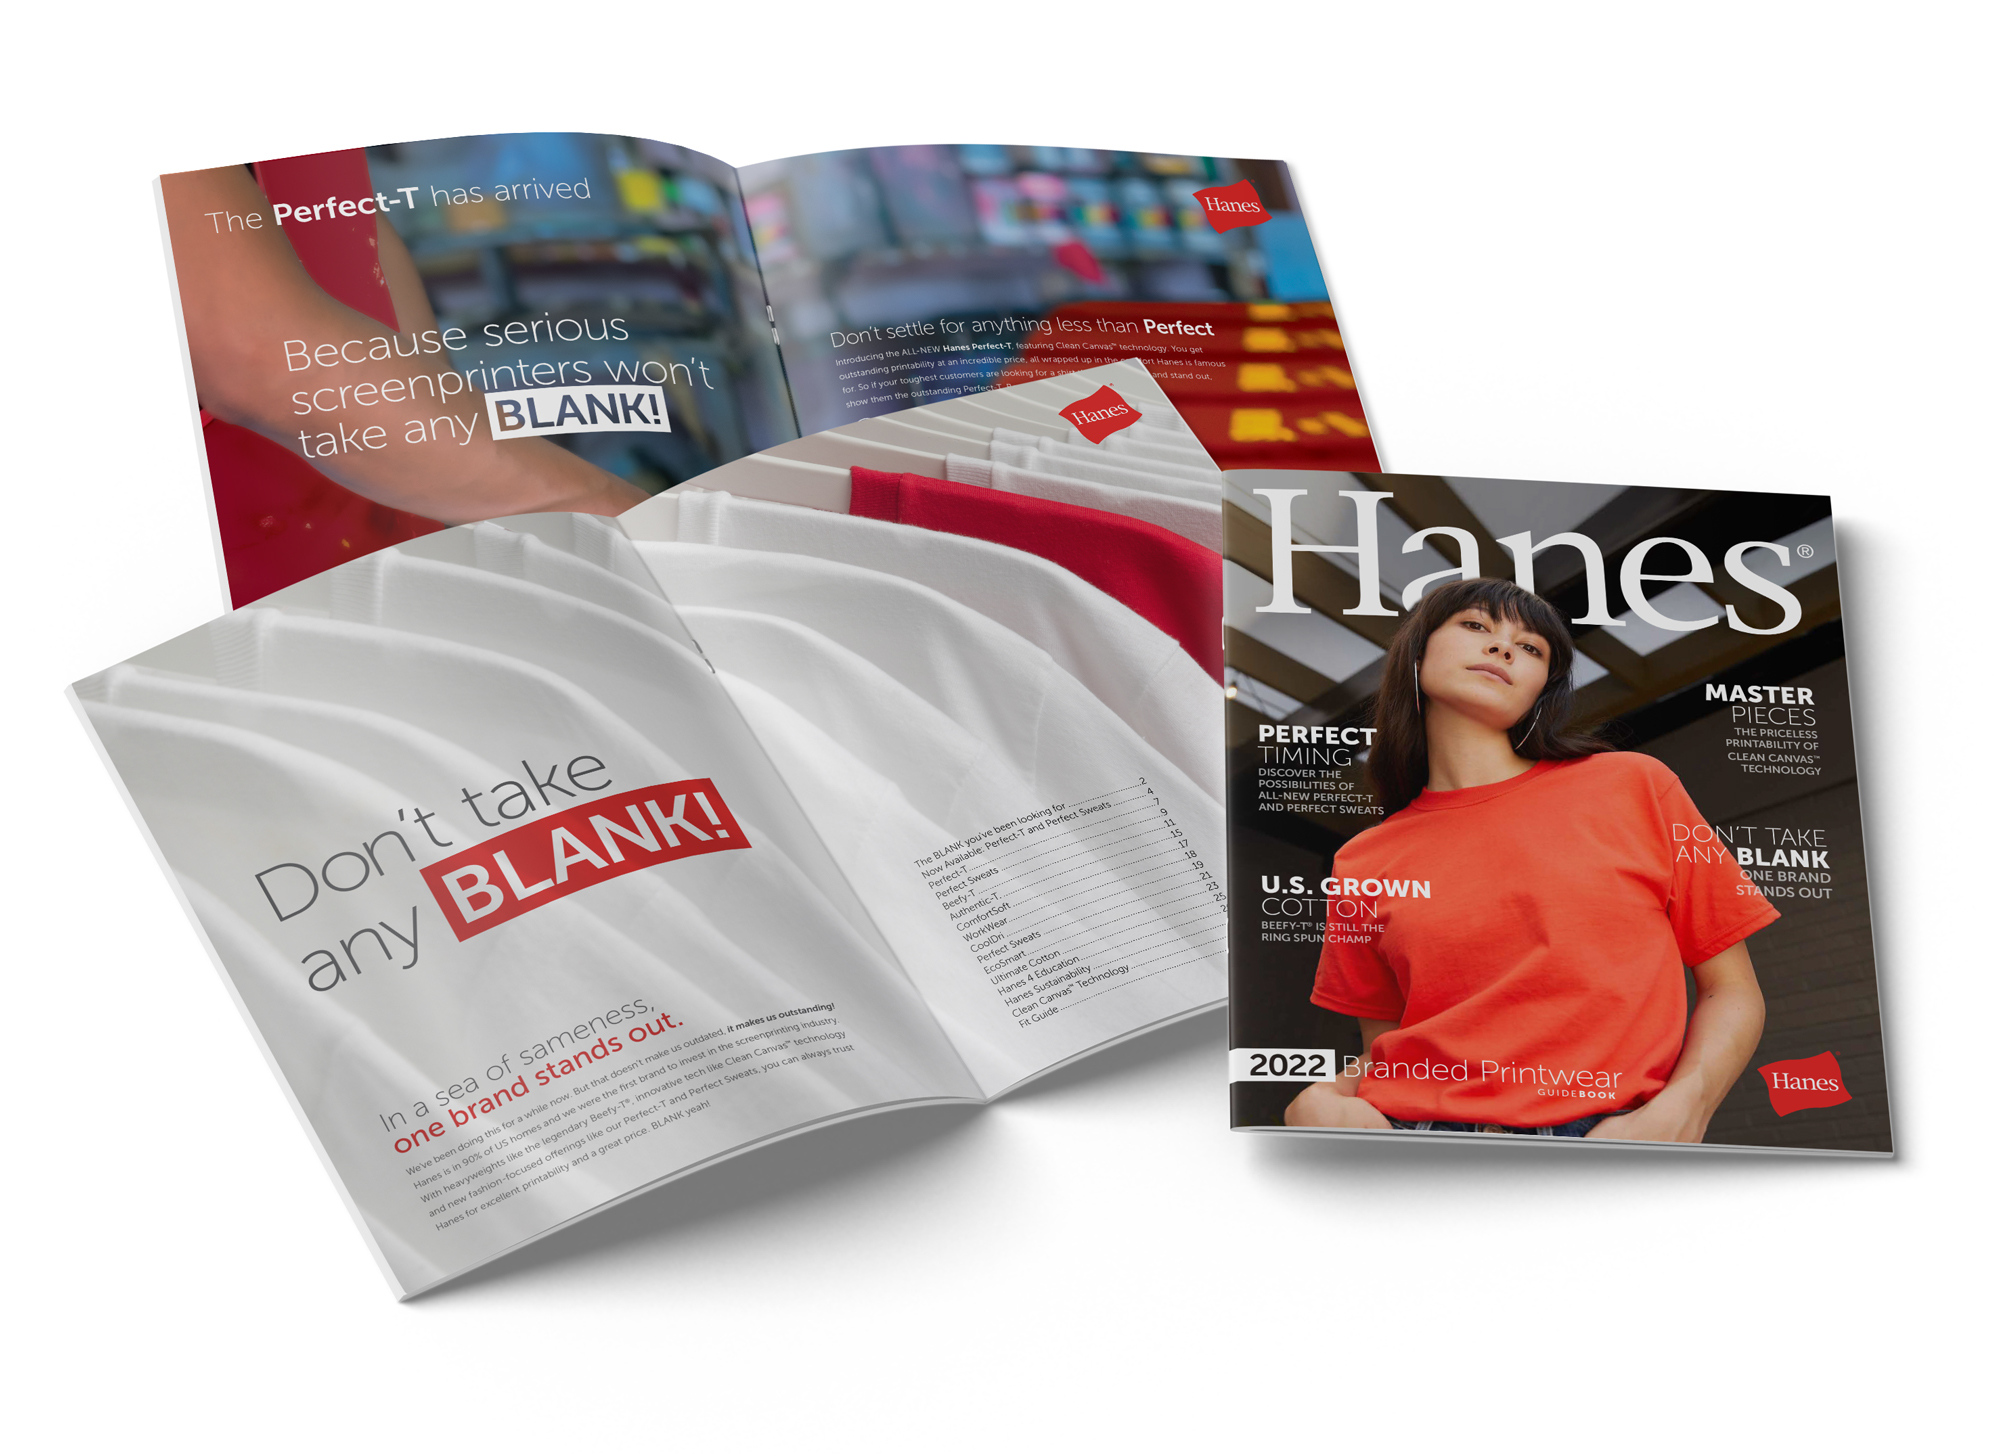 Hanes - Don’t take any blank campaign guidebook